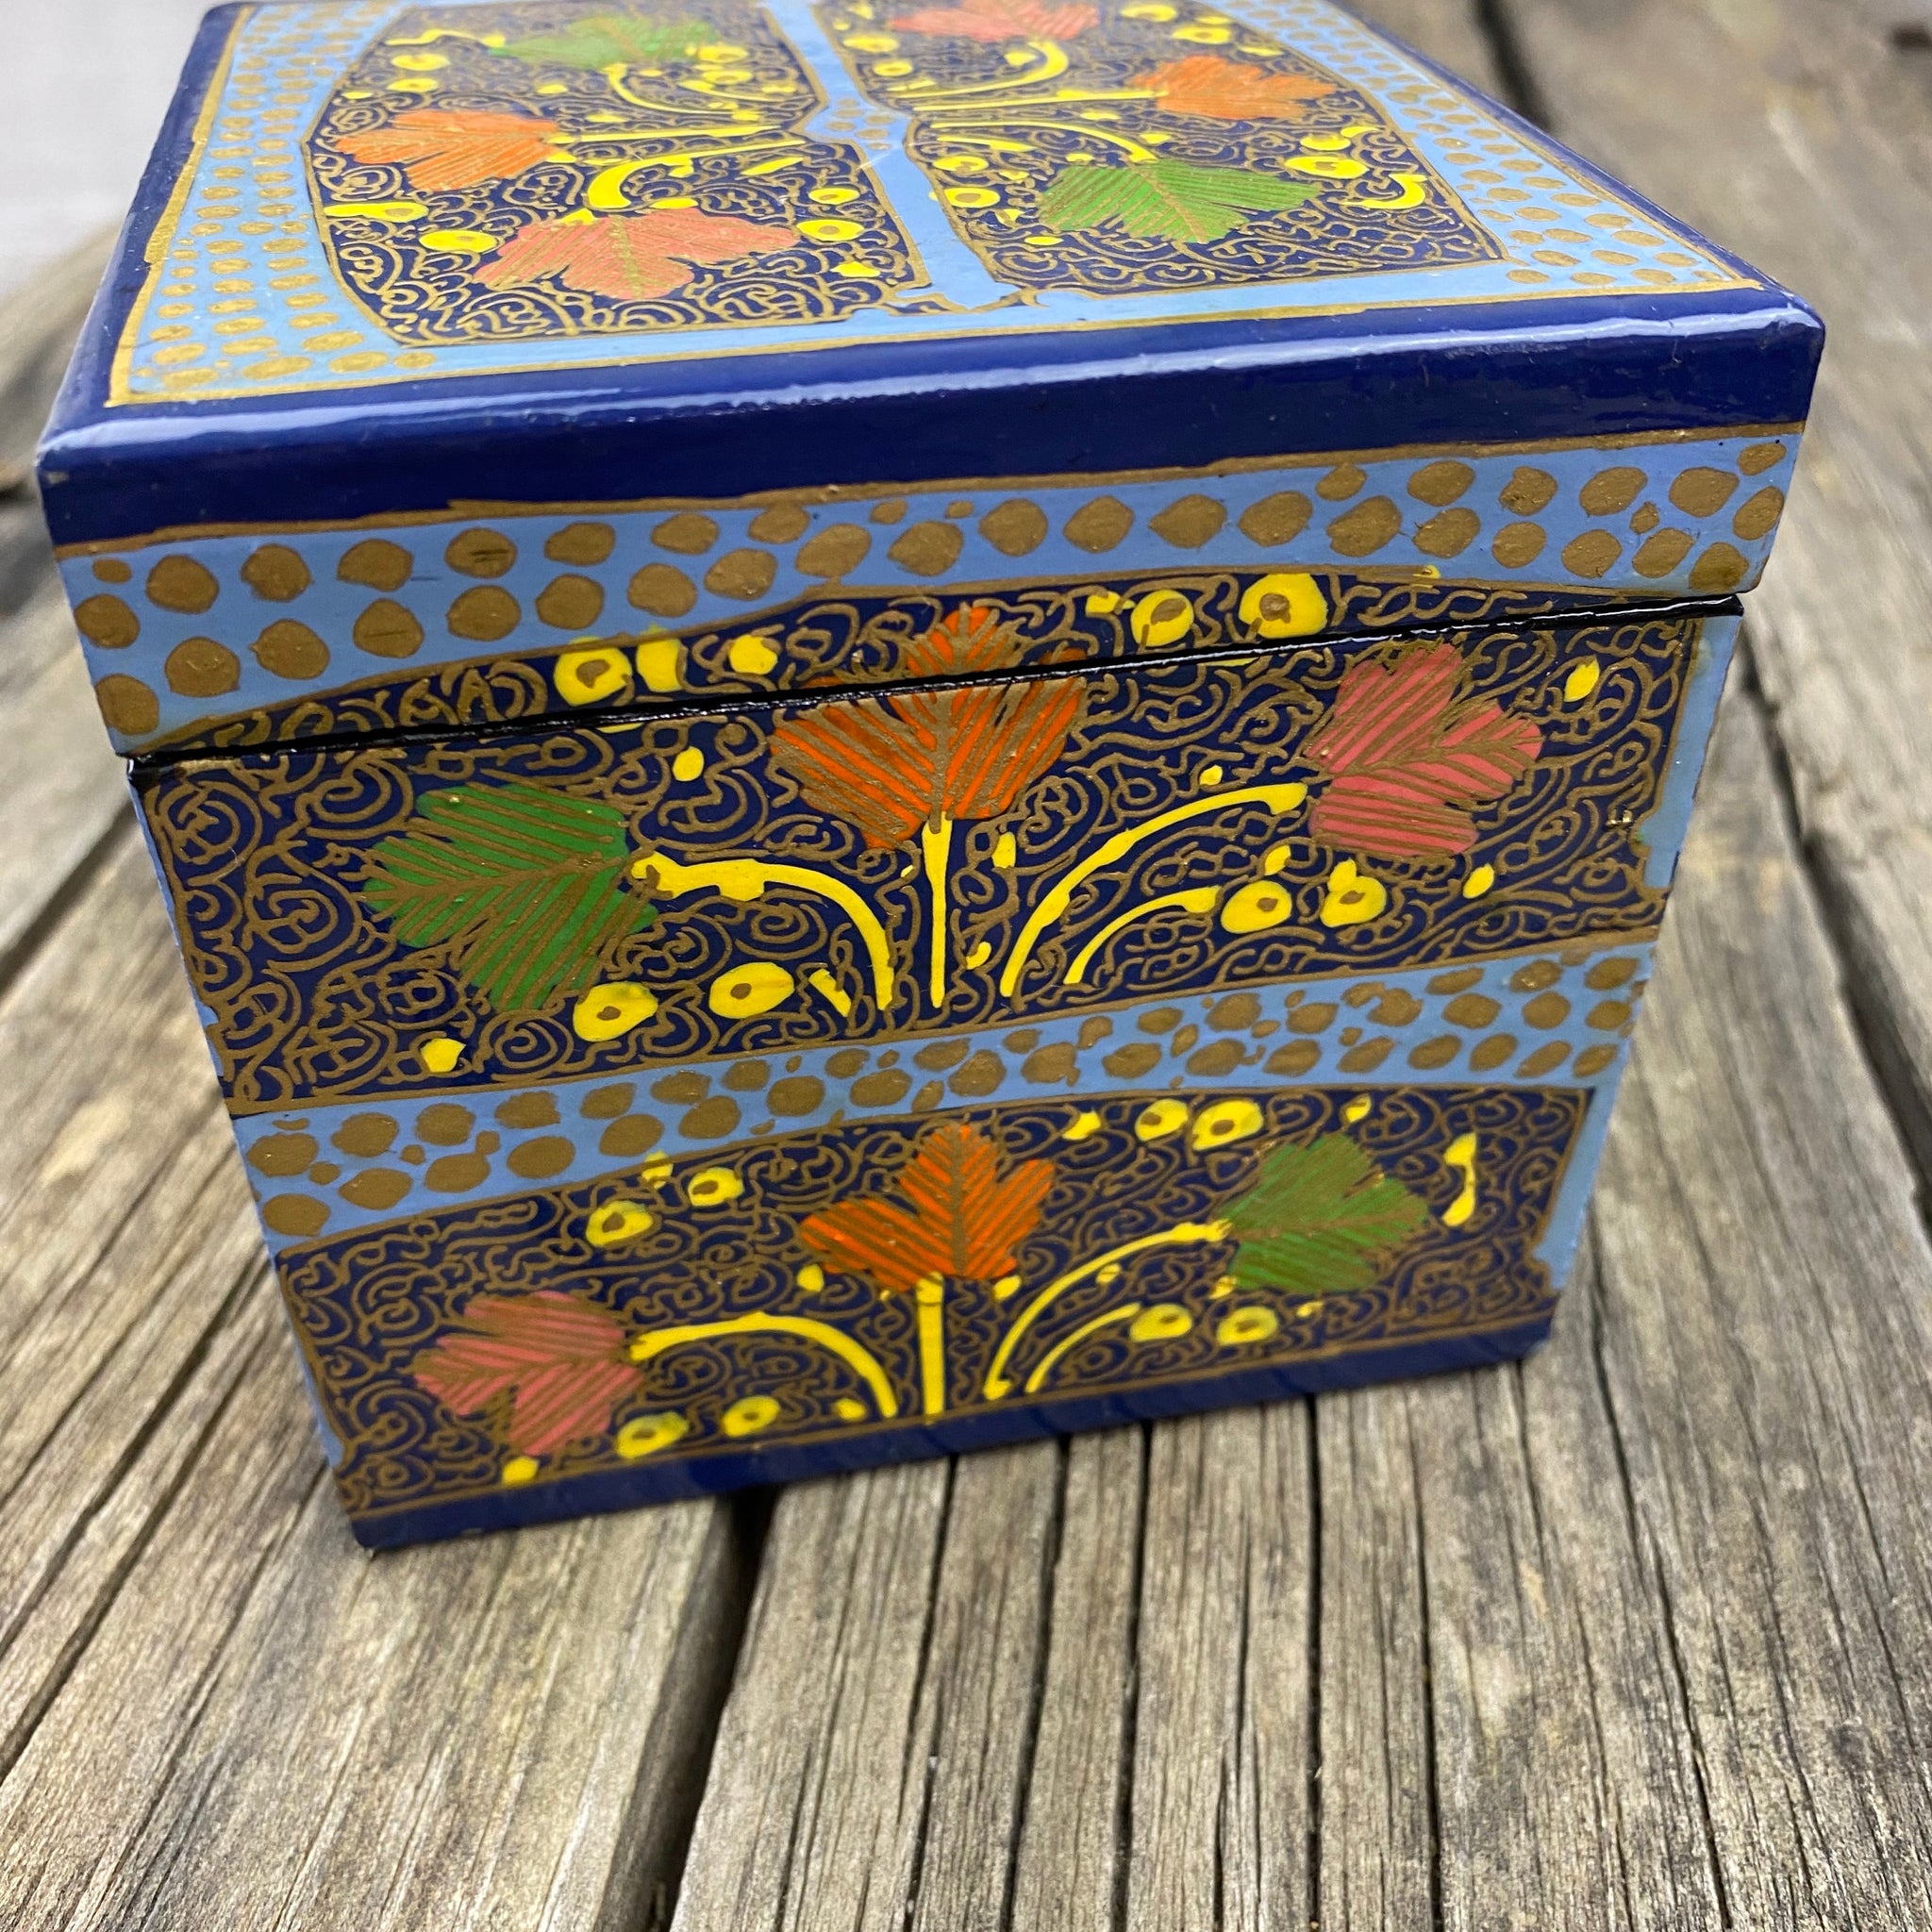 Fair Trade Ethical Hand Painted Square Box